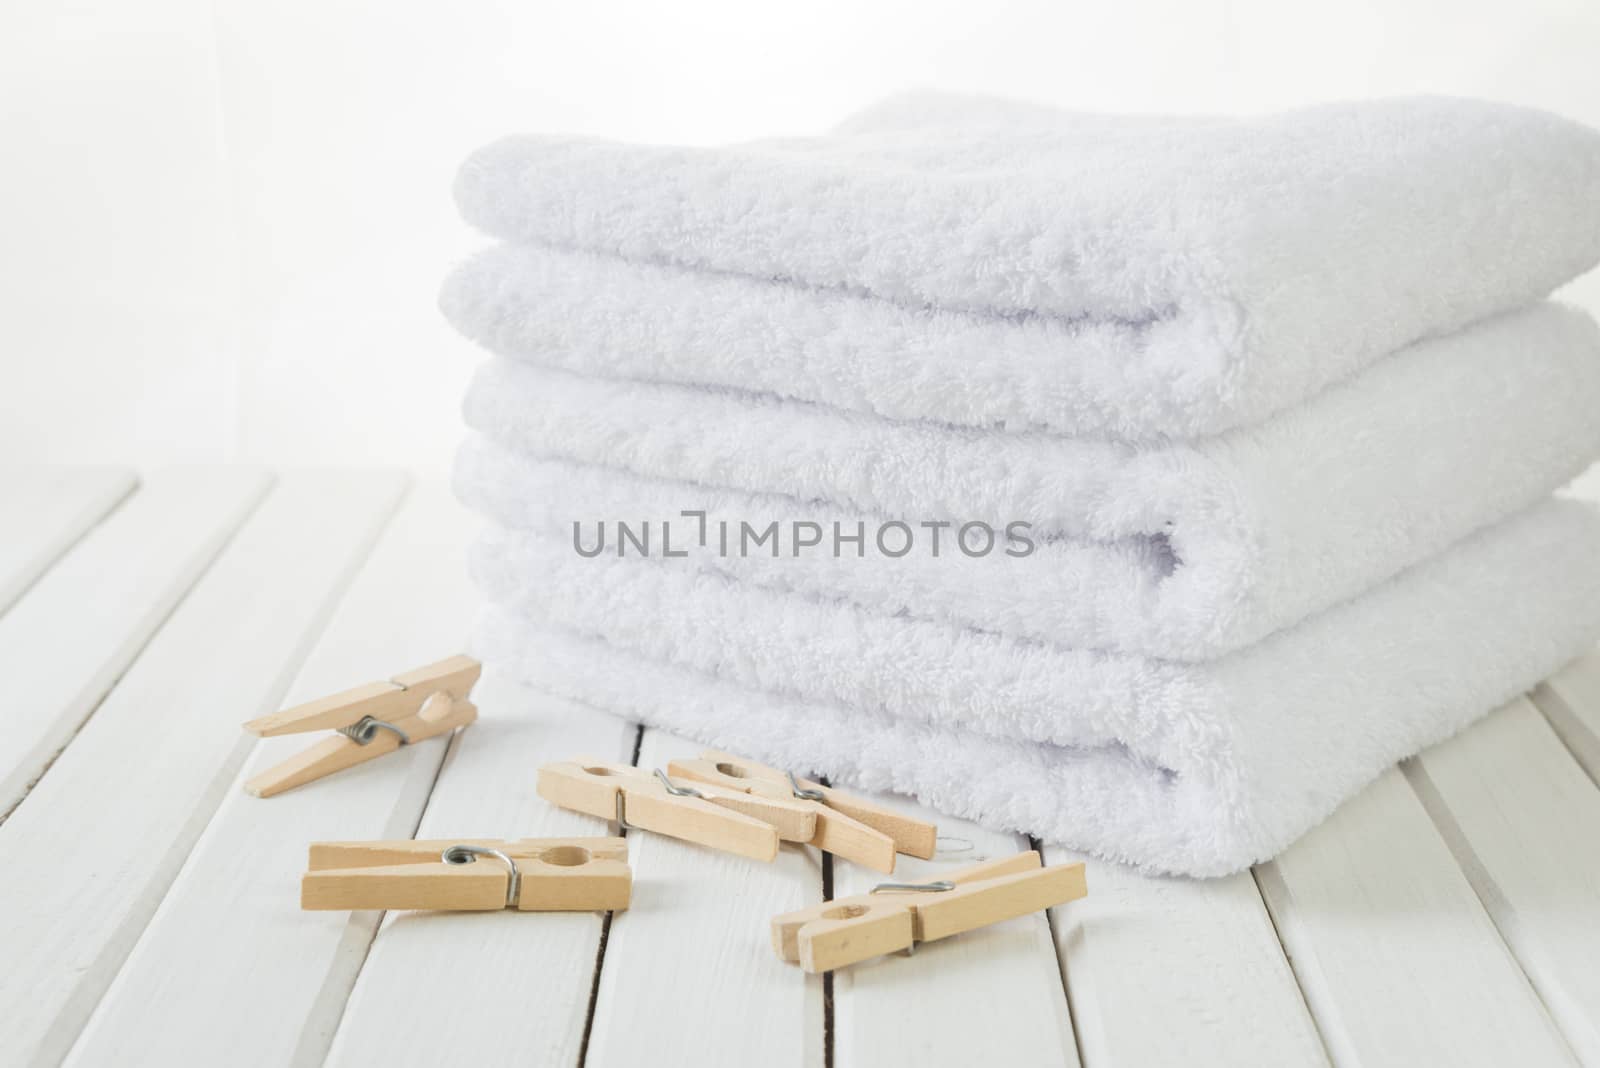 Bath towels and wooden clothespins by Epitavi